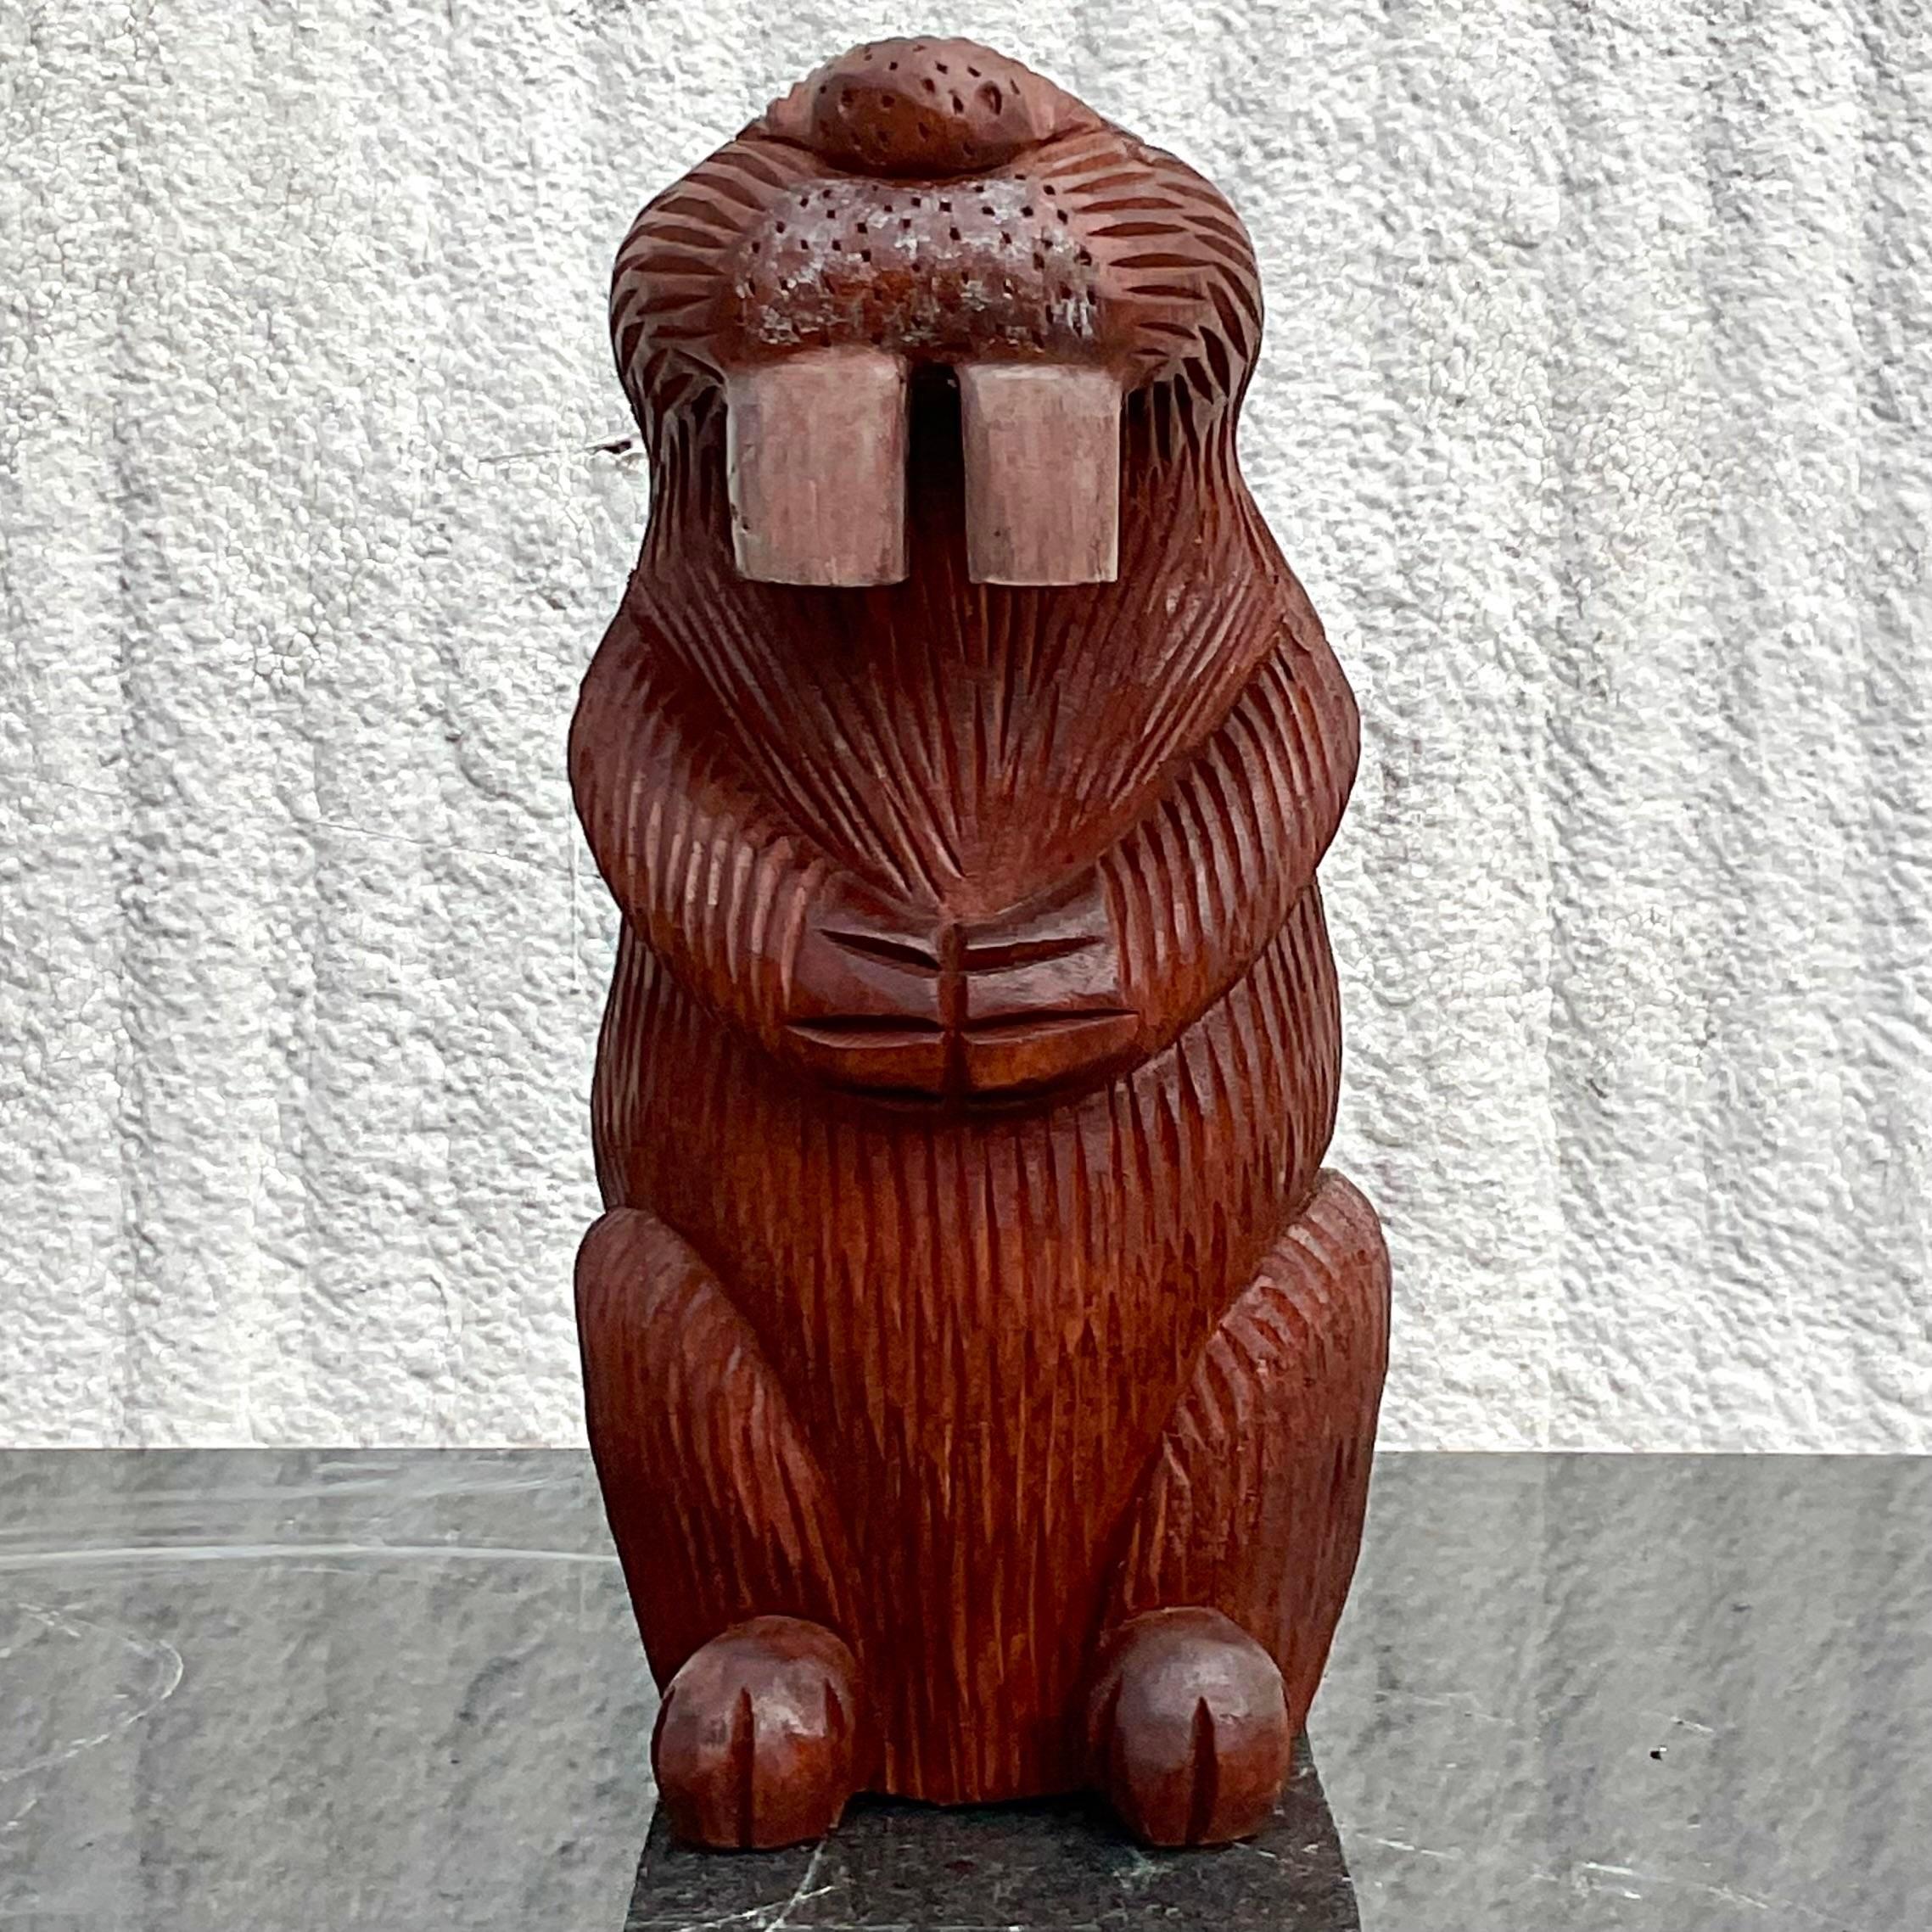 A fantastic vintage Primitive carved wood sculpture. A charming beaver sitting up. A great way to add a little charm to any space. Acquired from a Palm Beach estate.